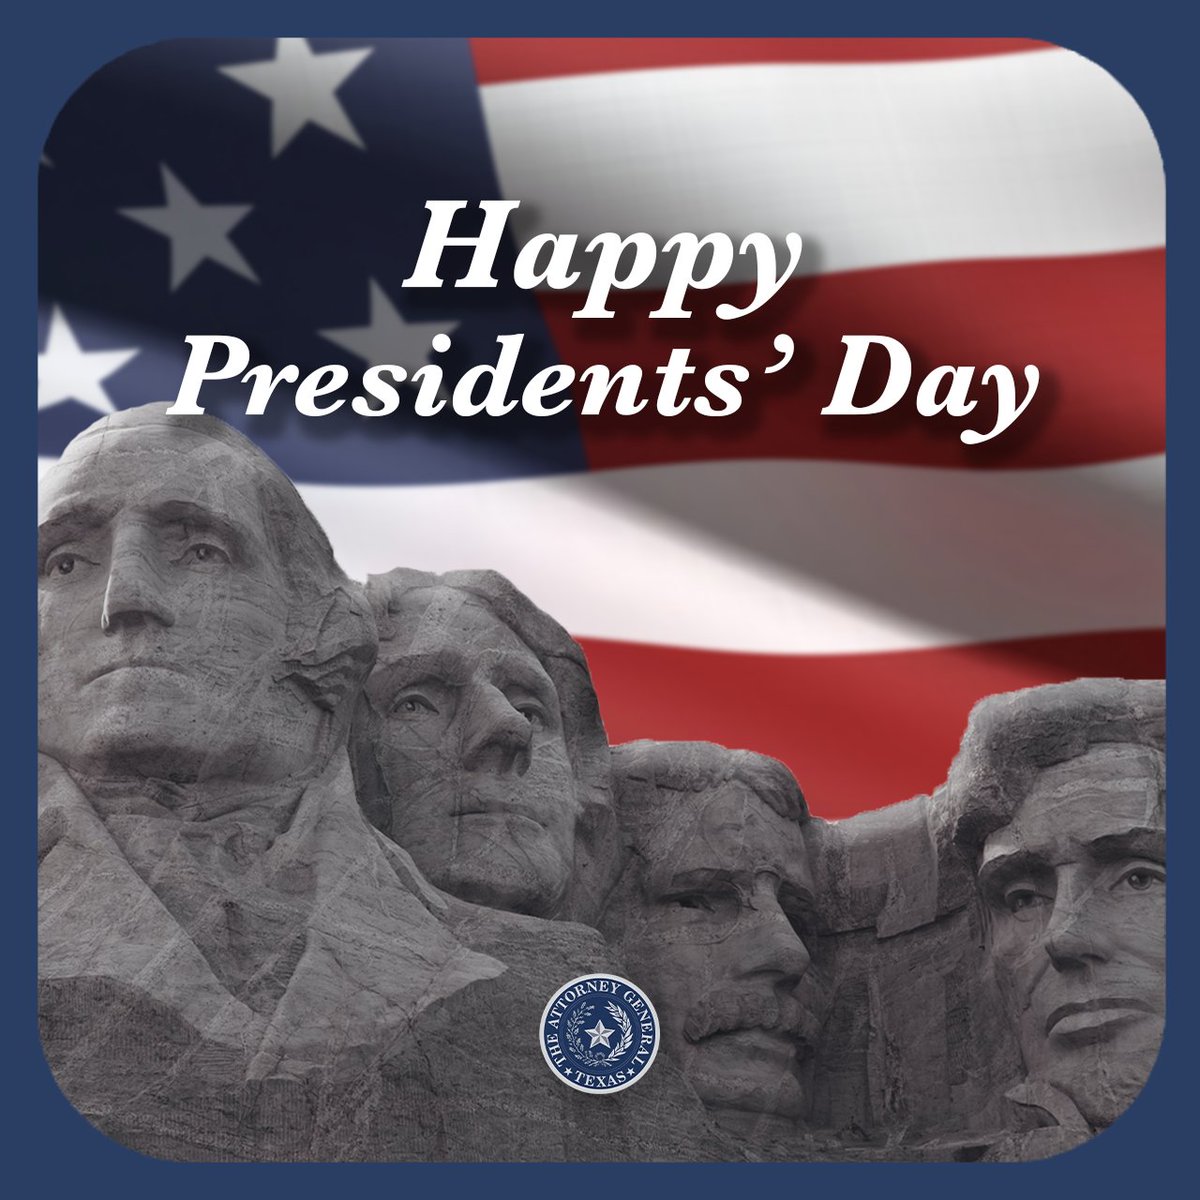 Happy Presidents’ Day from Attorney General Paxton and the Texas OAG!